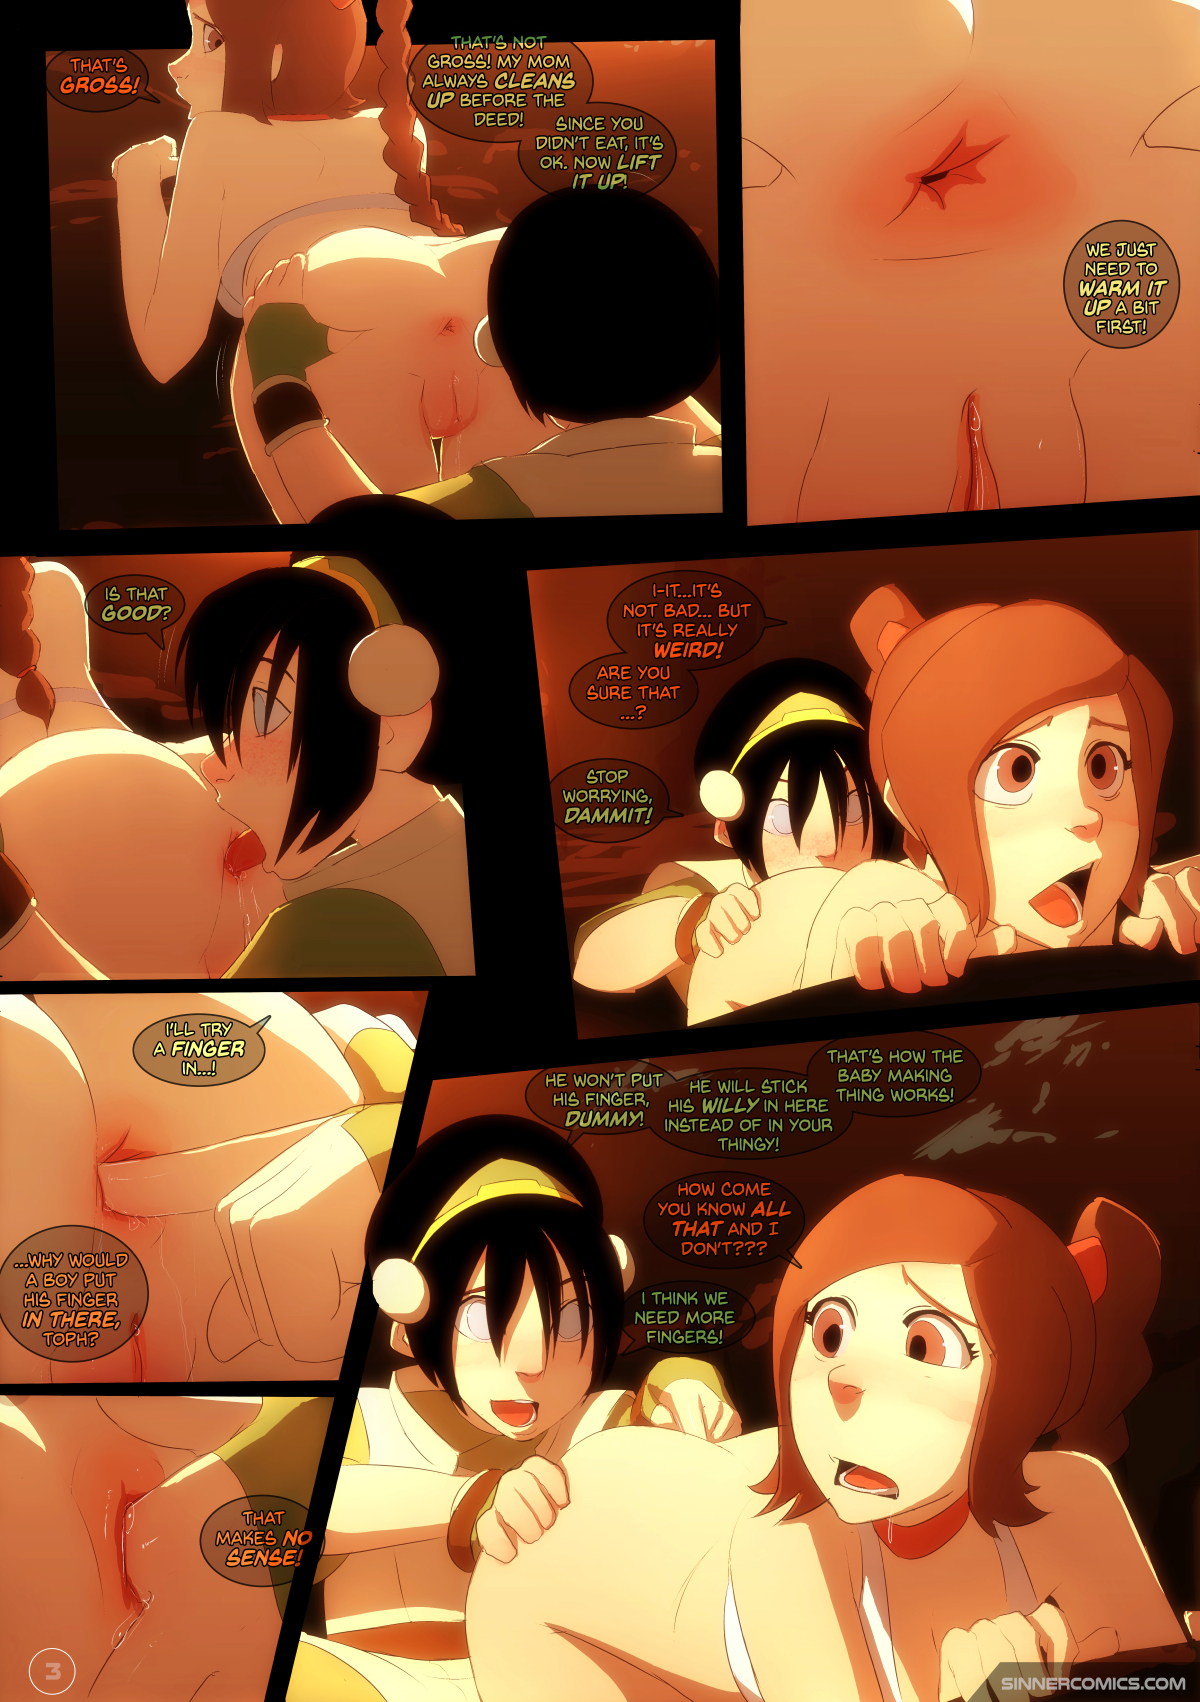 Updated new Sillygirl Toph vs Ty Lee Avatar The Last Airbender parody Porn Comics